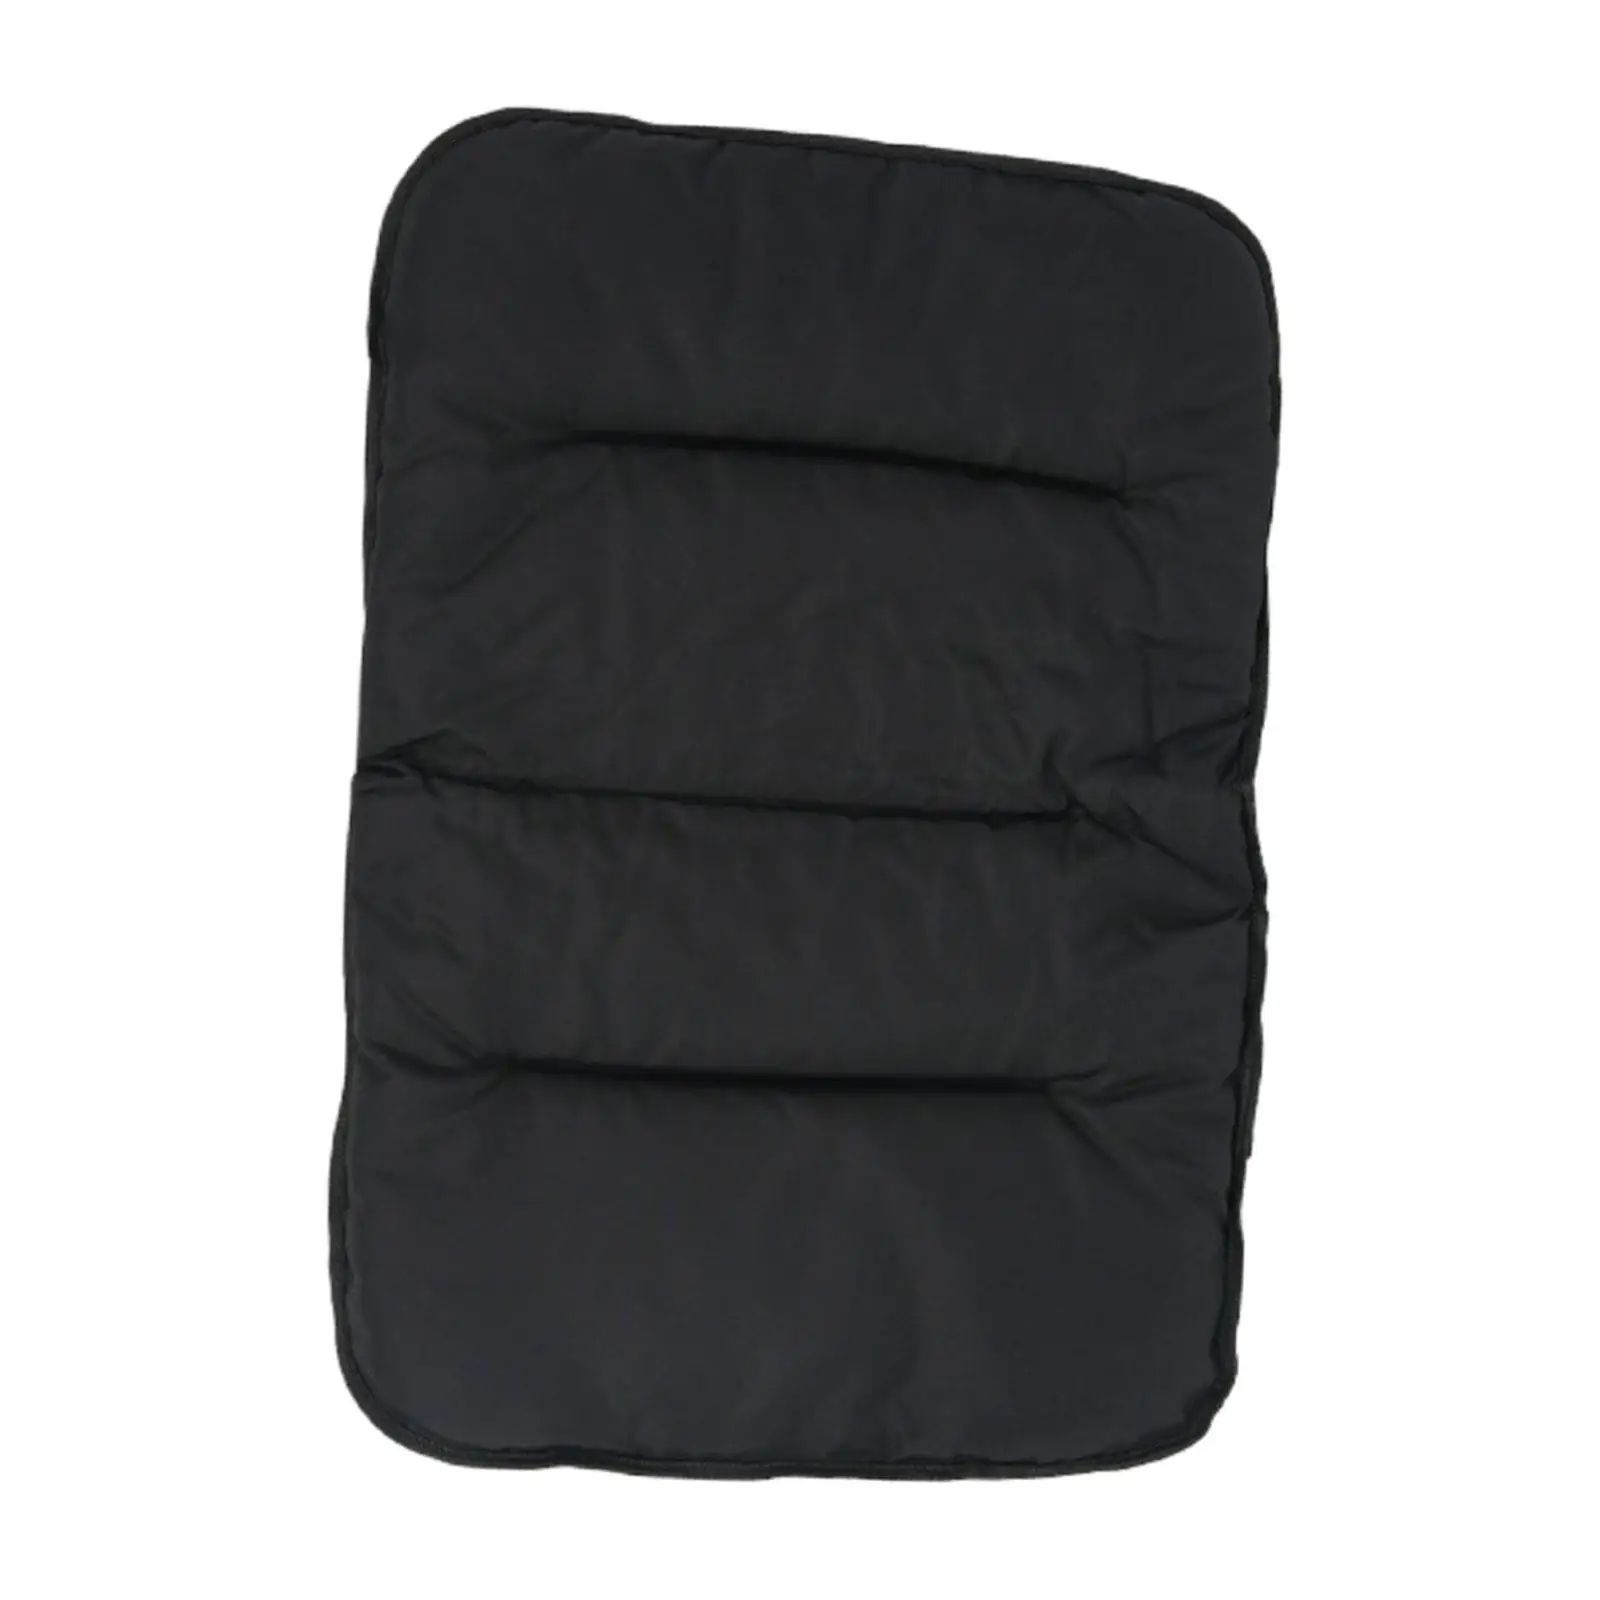 Folding Beach Chair Cushion Adults Lightweight Back Support Cushion for Backpacking Camping Outdoor Concerts Travel Trekking